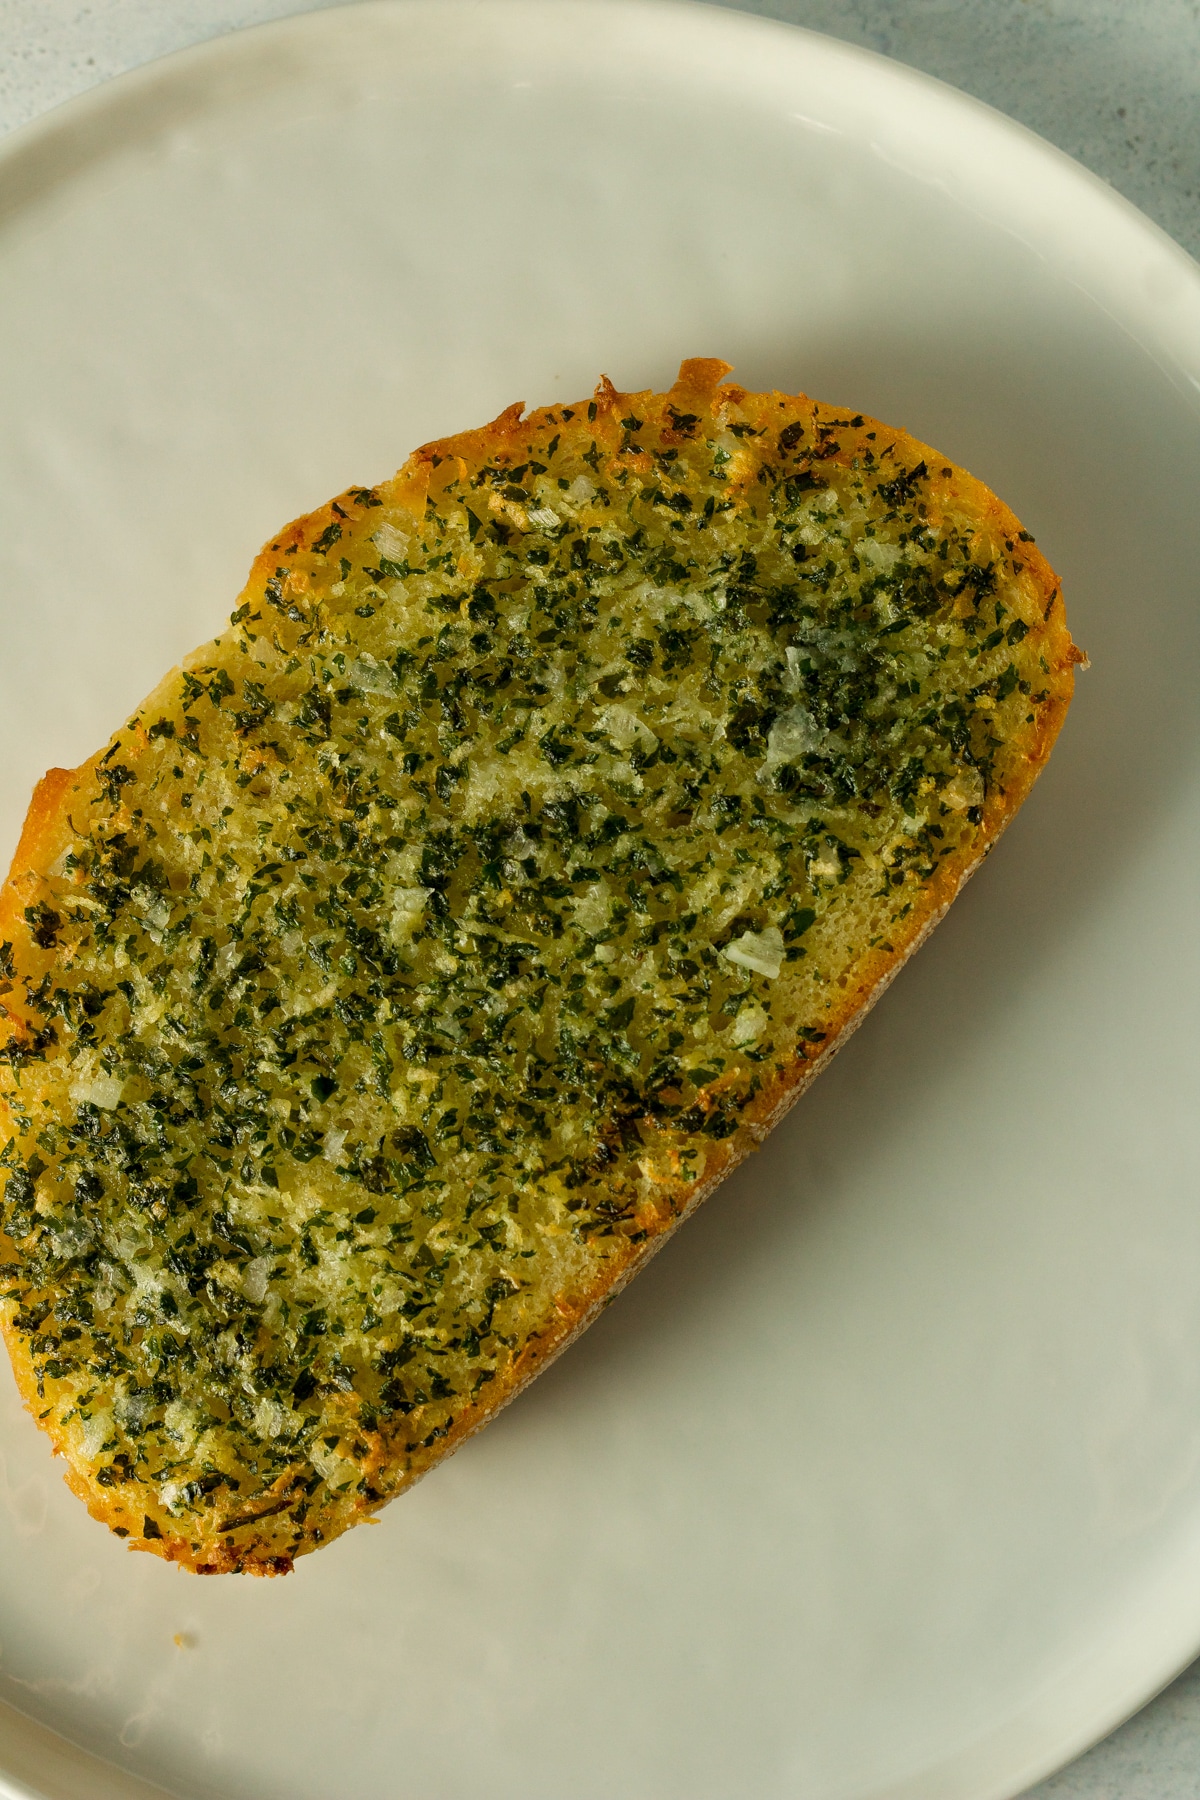 Homemade garlic bread for one on plate.